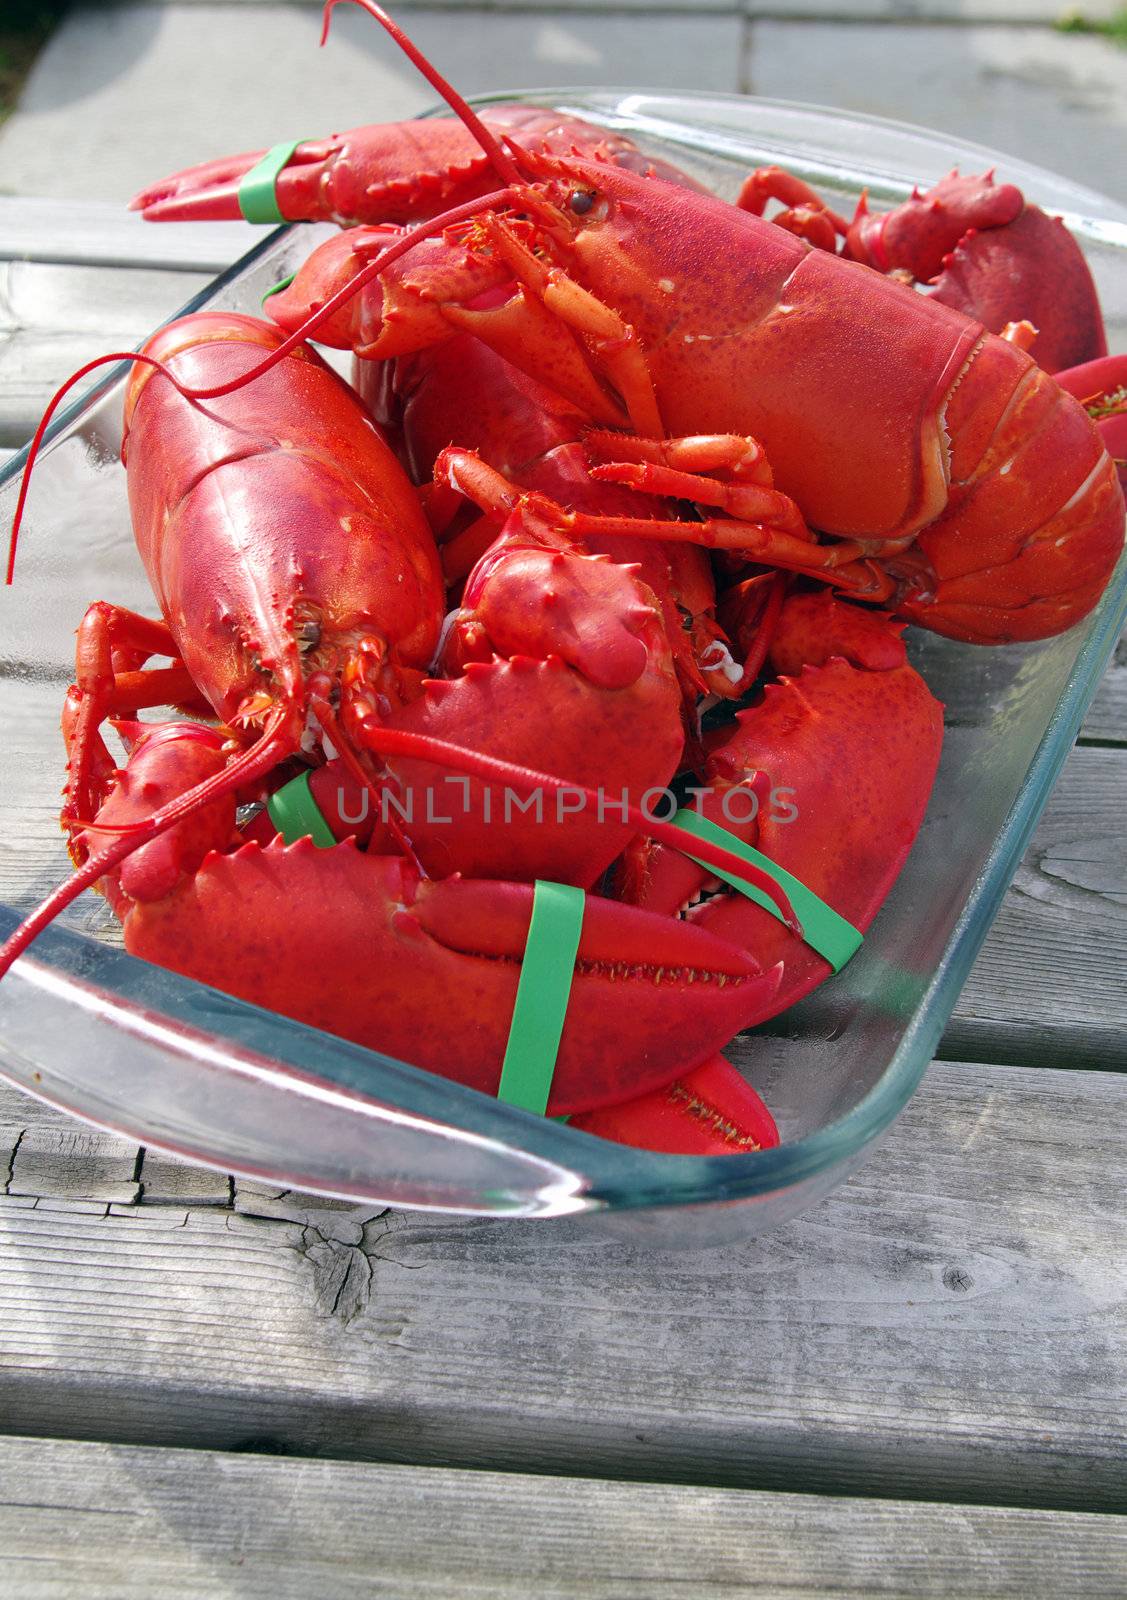 Freshly Cooked Lobster by edcorey